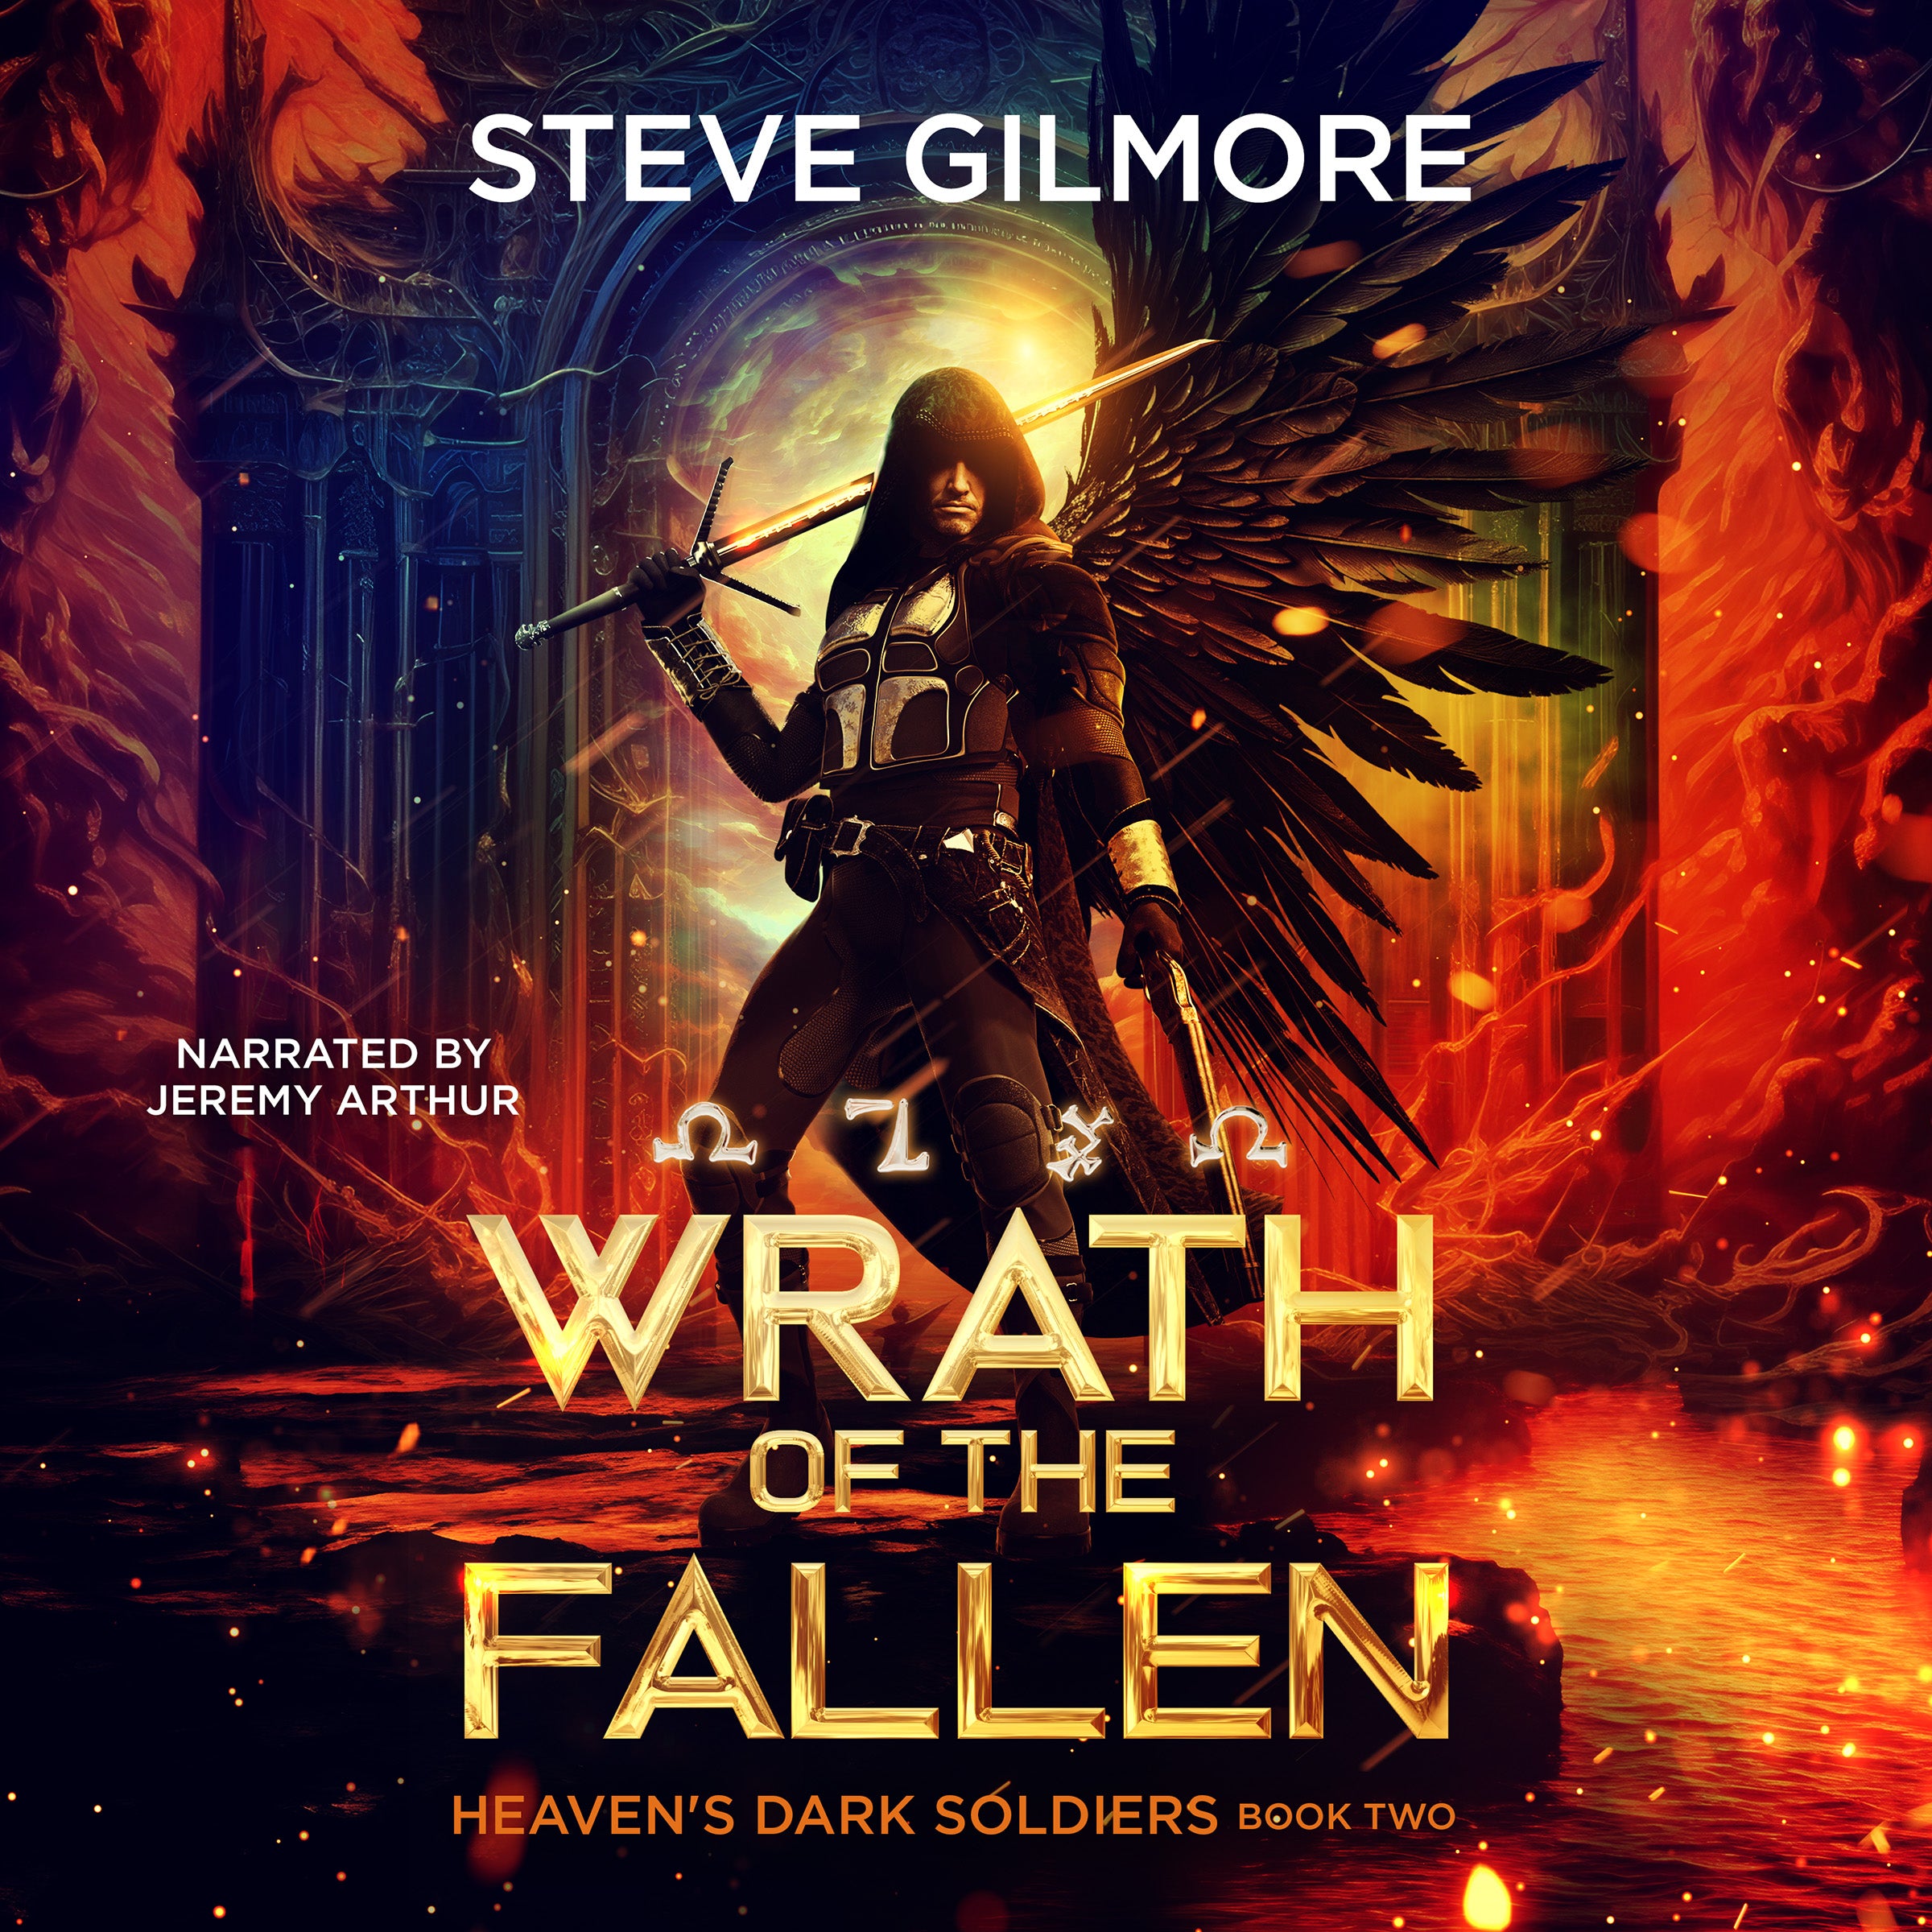 Wrath of the Fallen (Heaven's Dark Soldiers Book 2) Audiobook Narrated by Jeremy Athur